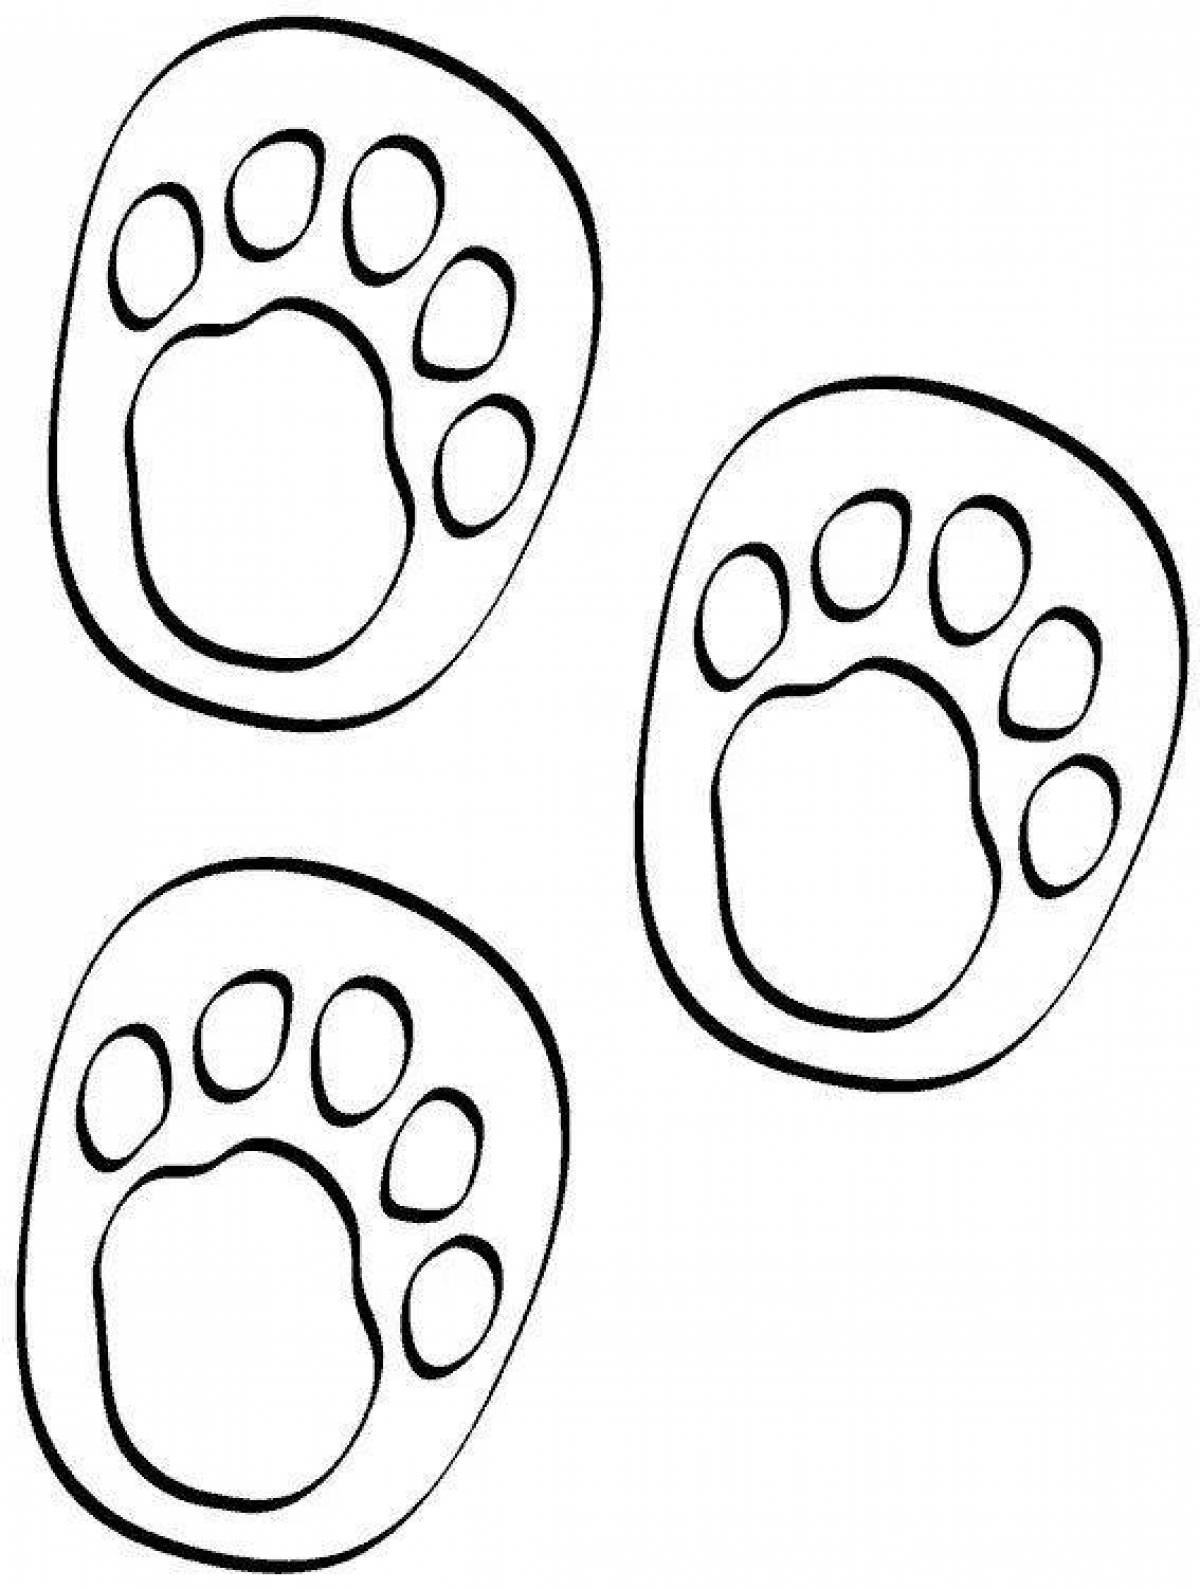 Colorful footprint coloring page